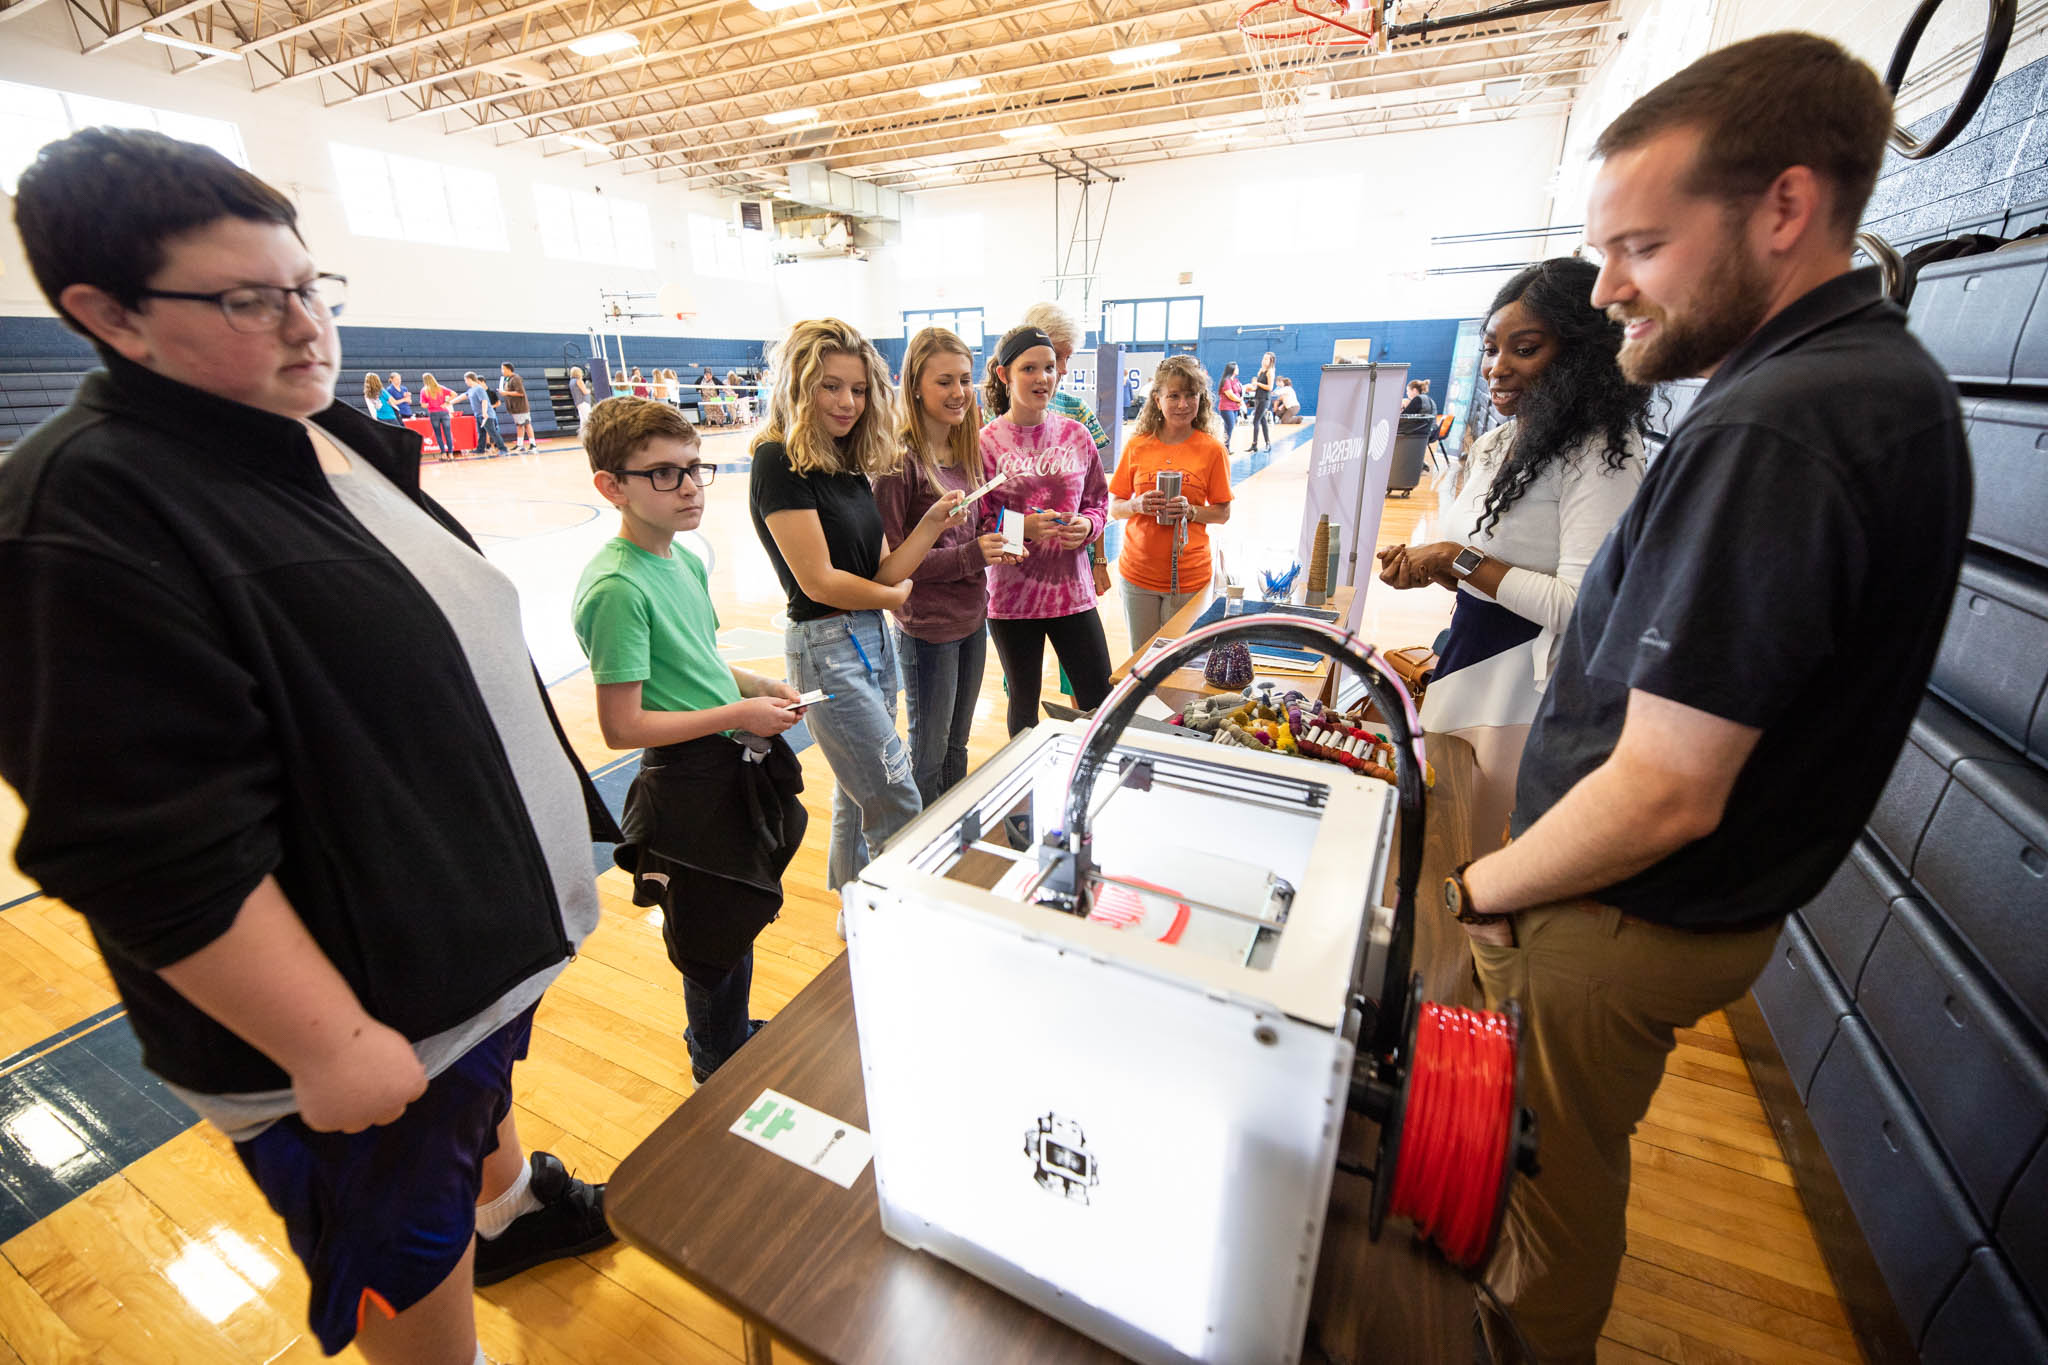 Young students watch a 3D printer in action on a folding table in a gymnasium.